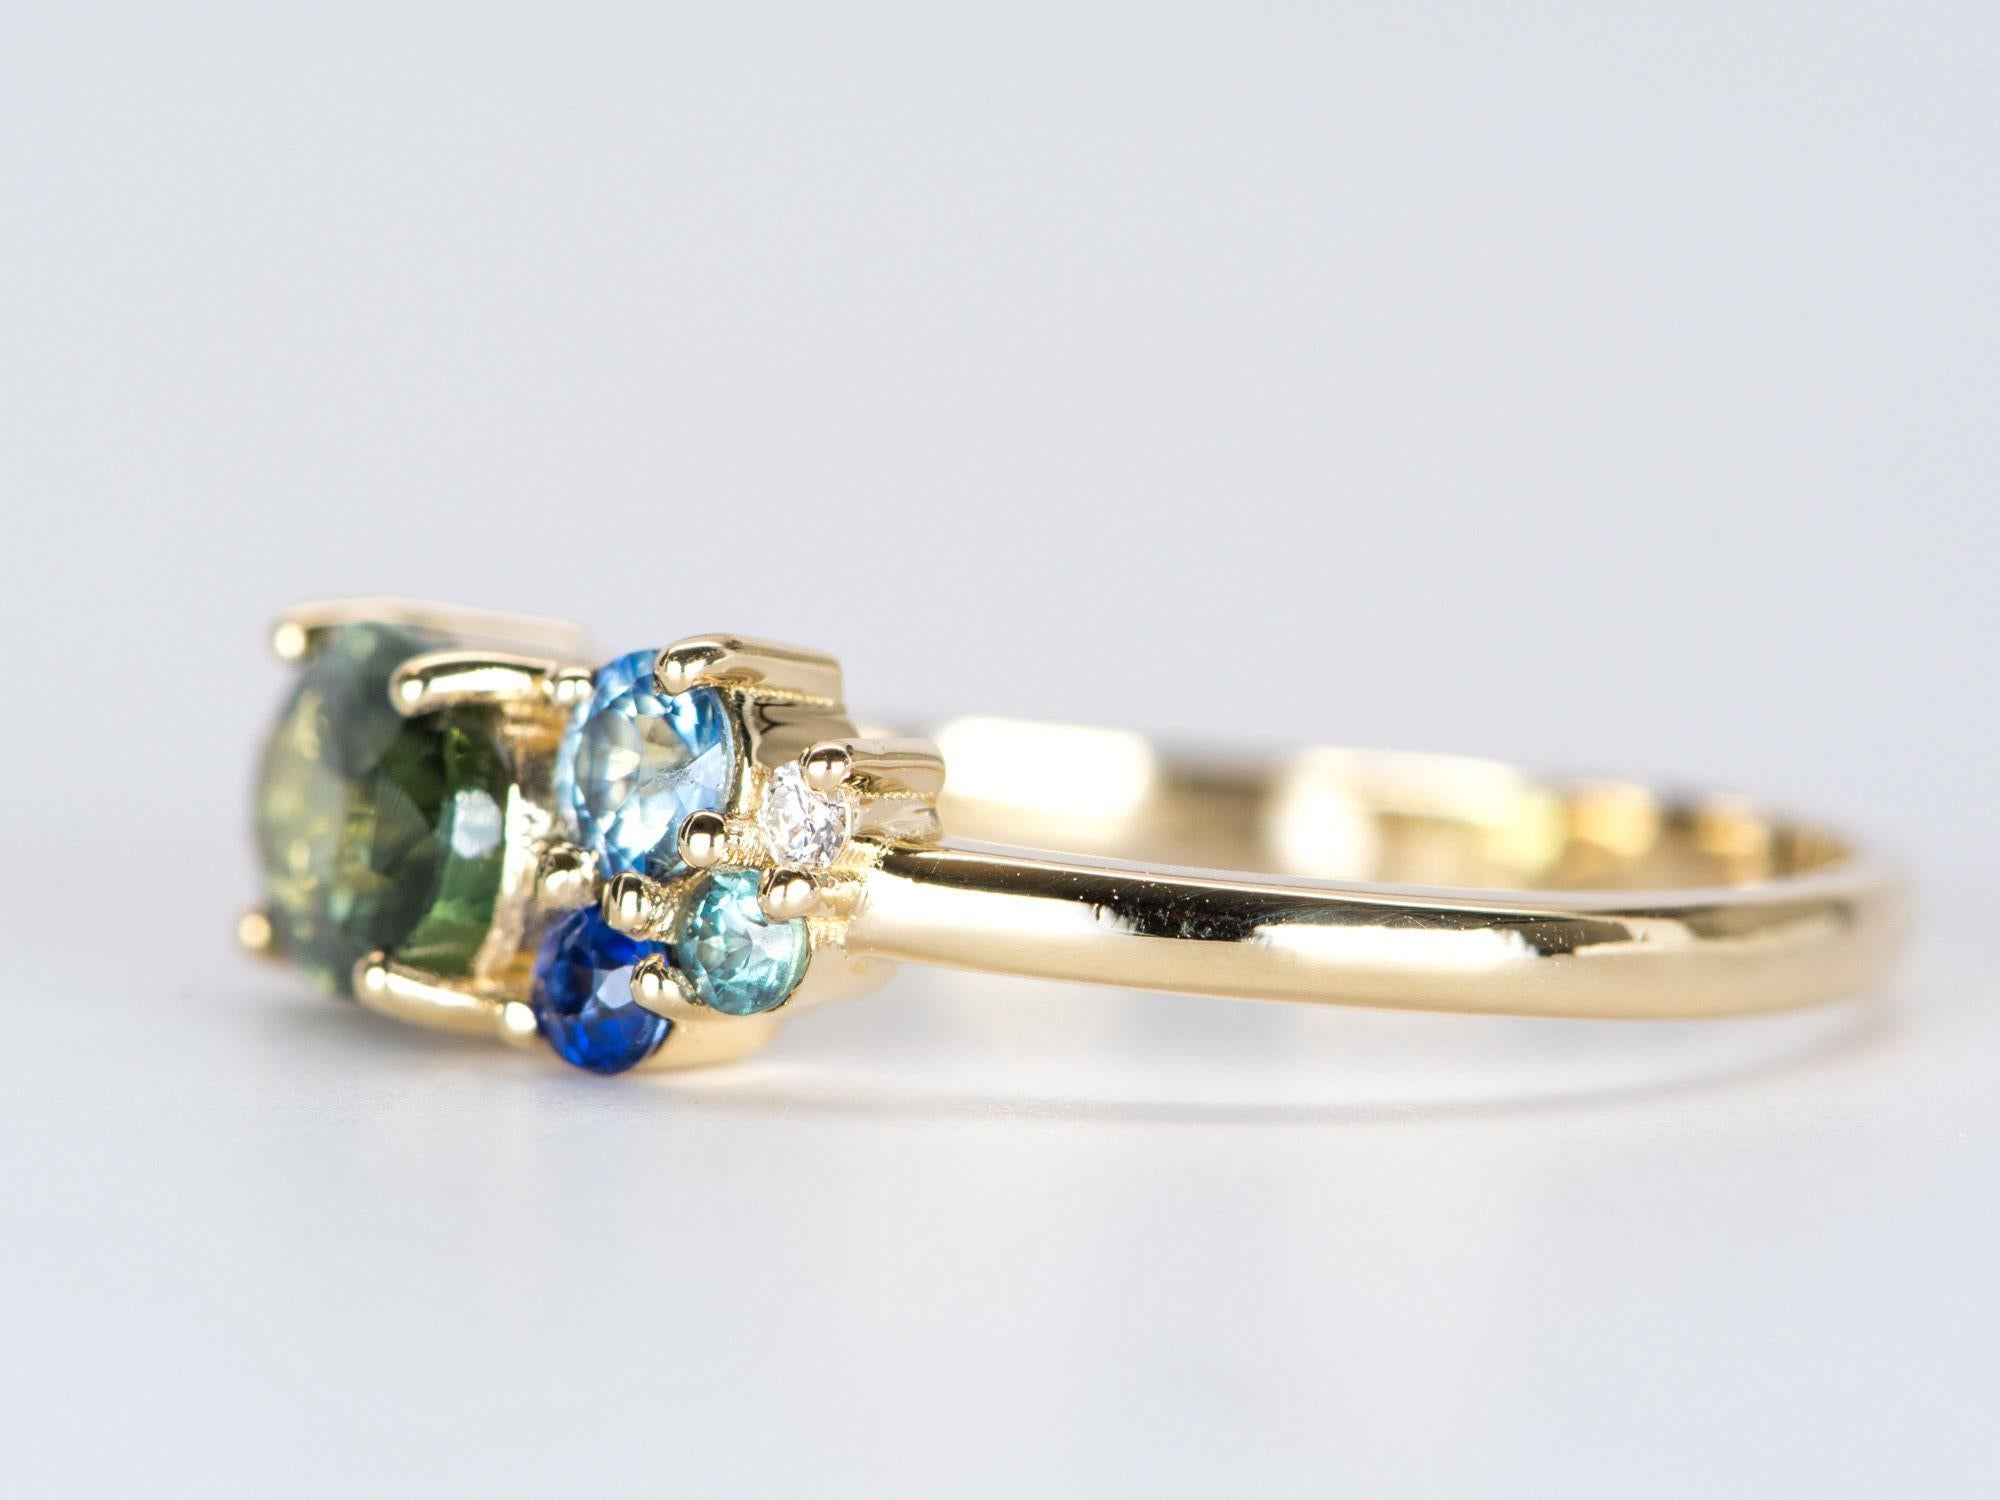 ♥ 1.32ct Nigerian Sapphire Cluster Ring 14K Yellow Gold Tanzanite Aquamarine Alexandrite Diamond
♥ Solid 14k yellow gold ring set with a beautiful oval-shaped sapphire
♥ Gorgeous blue green color!
♥ The item measures 6.02 mm in length, 16.7 mm in